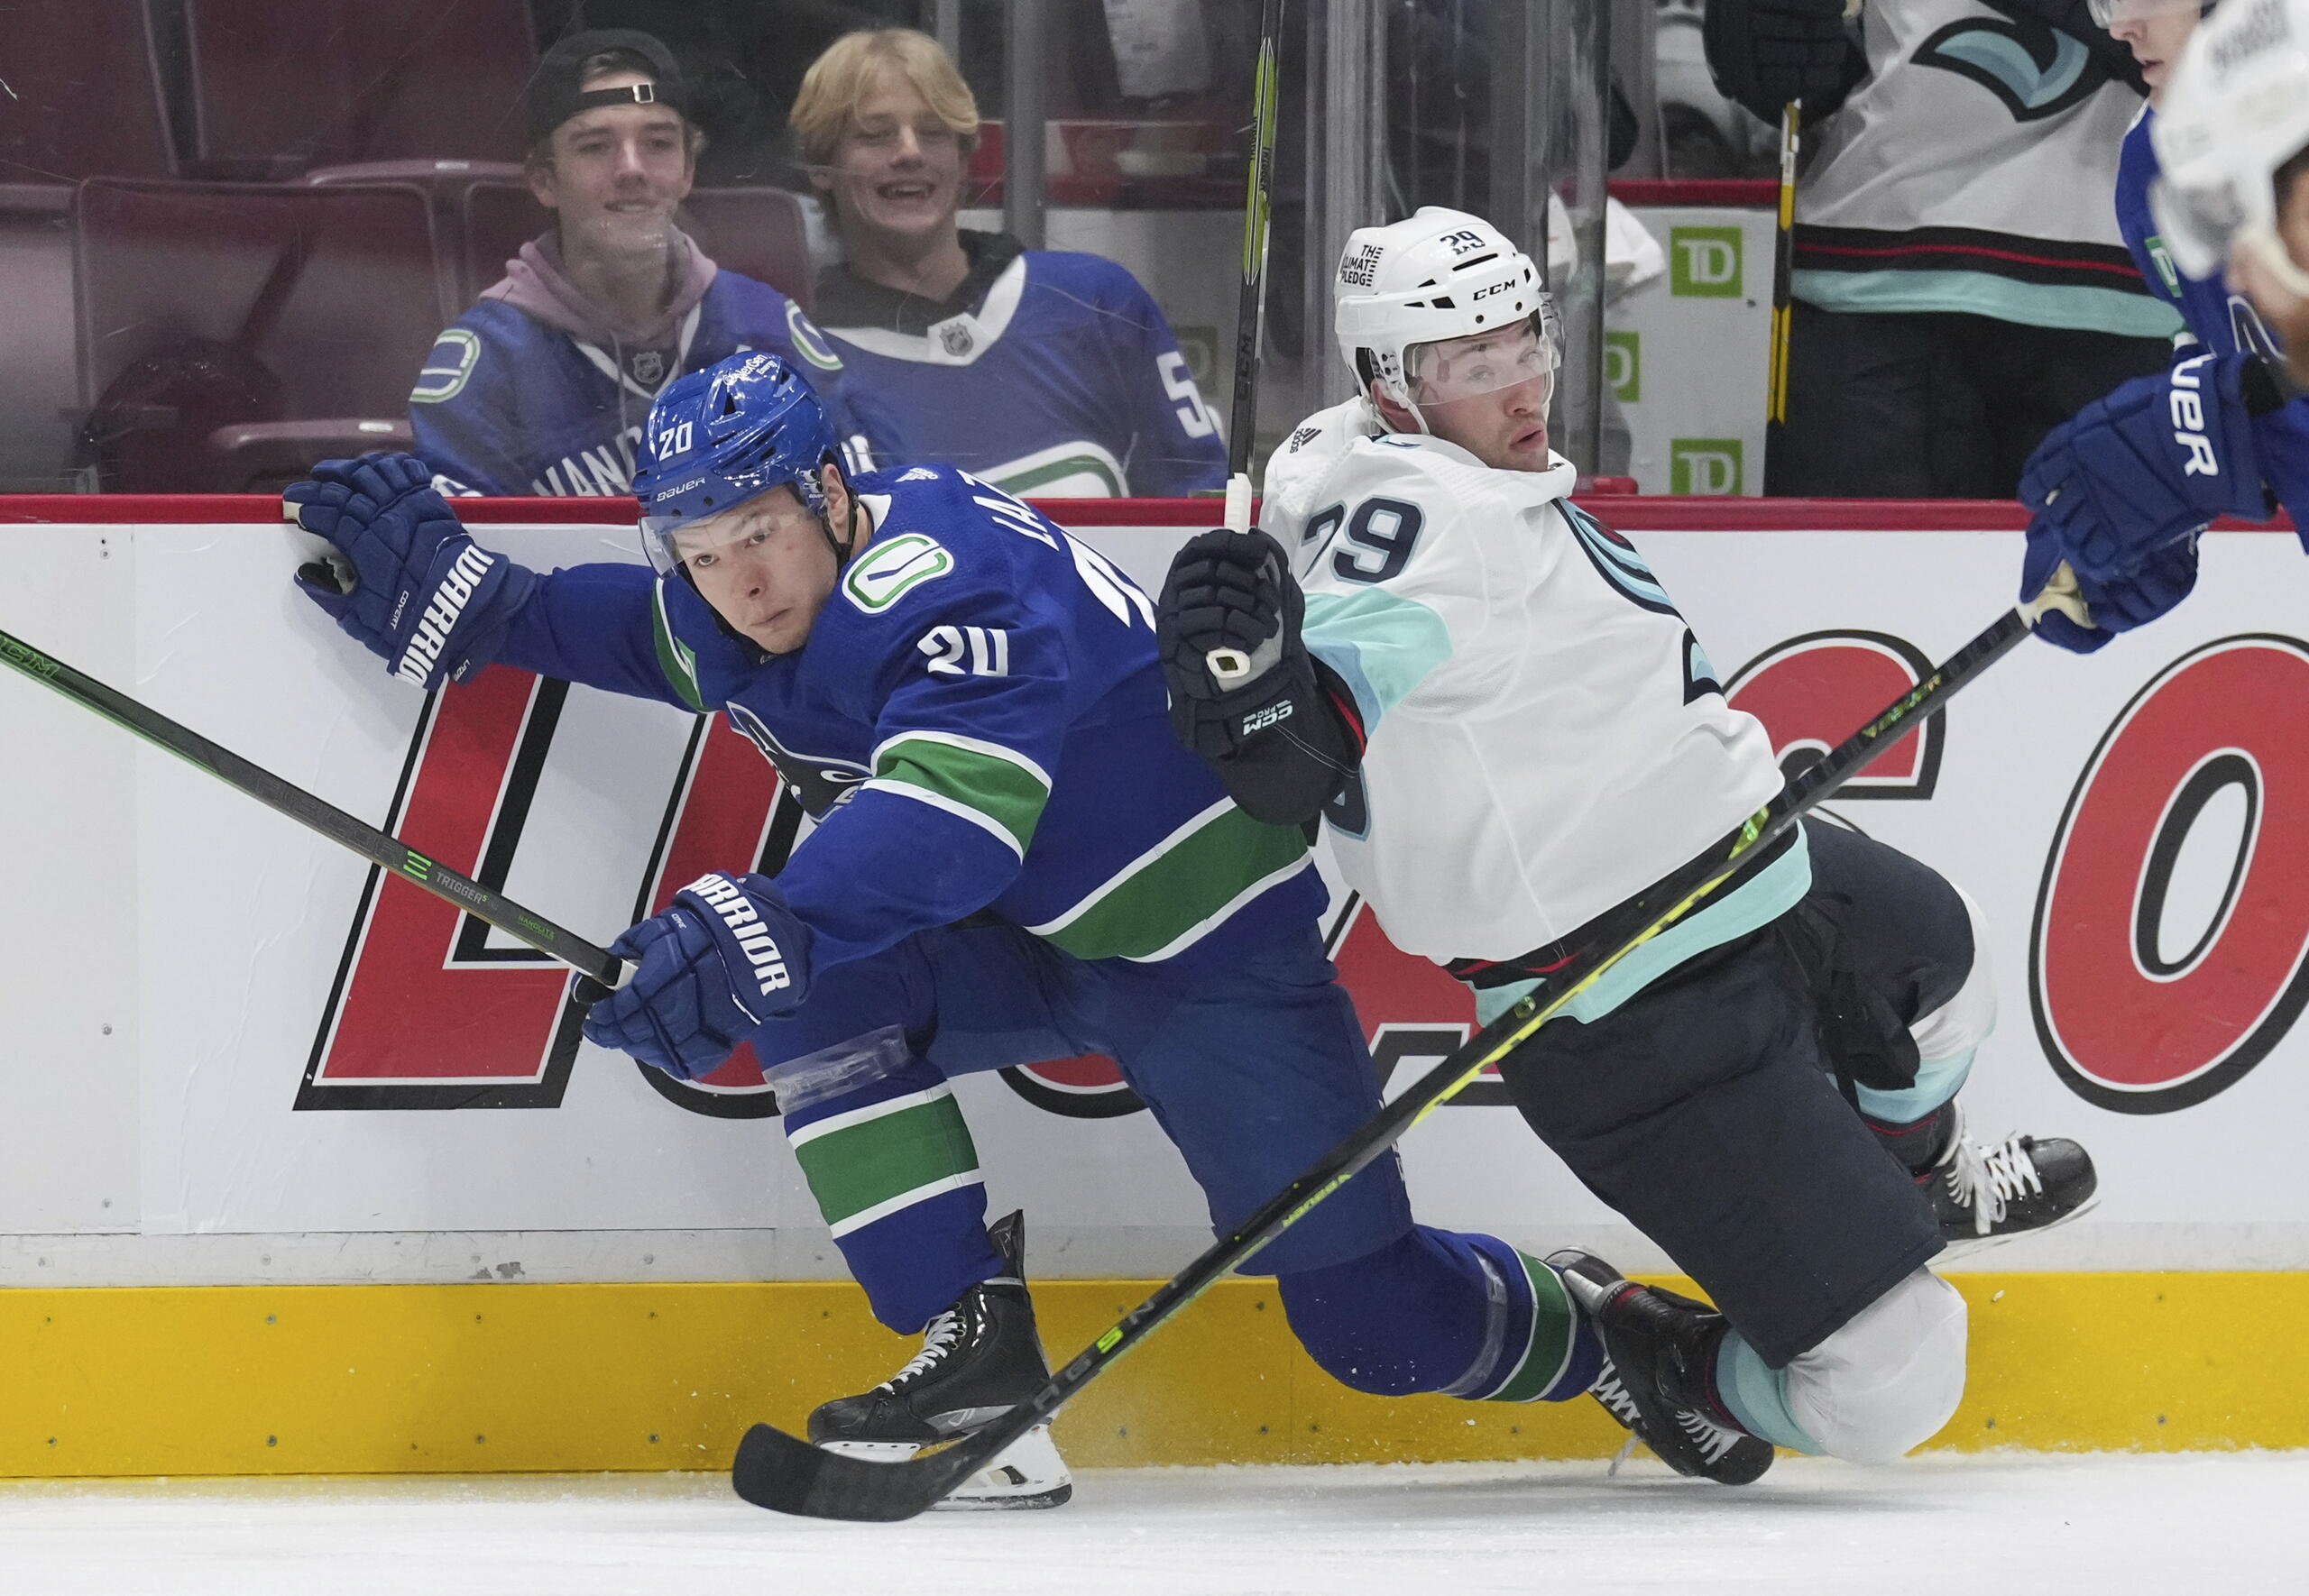 Vancouver Canucks' Curtis Lazar, left, and Seattle Kraken's Vince Dunn collide during the first period of an NHL hockey game Thursday, Dec. 22, 2022, in Vancouver, British Columbia.